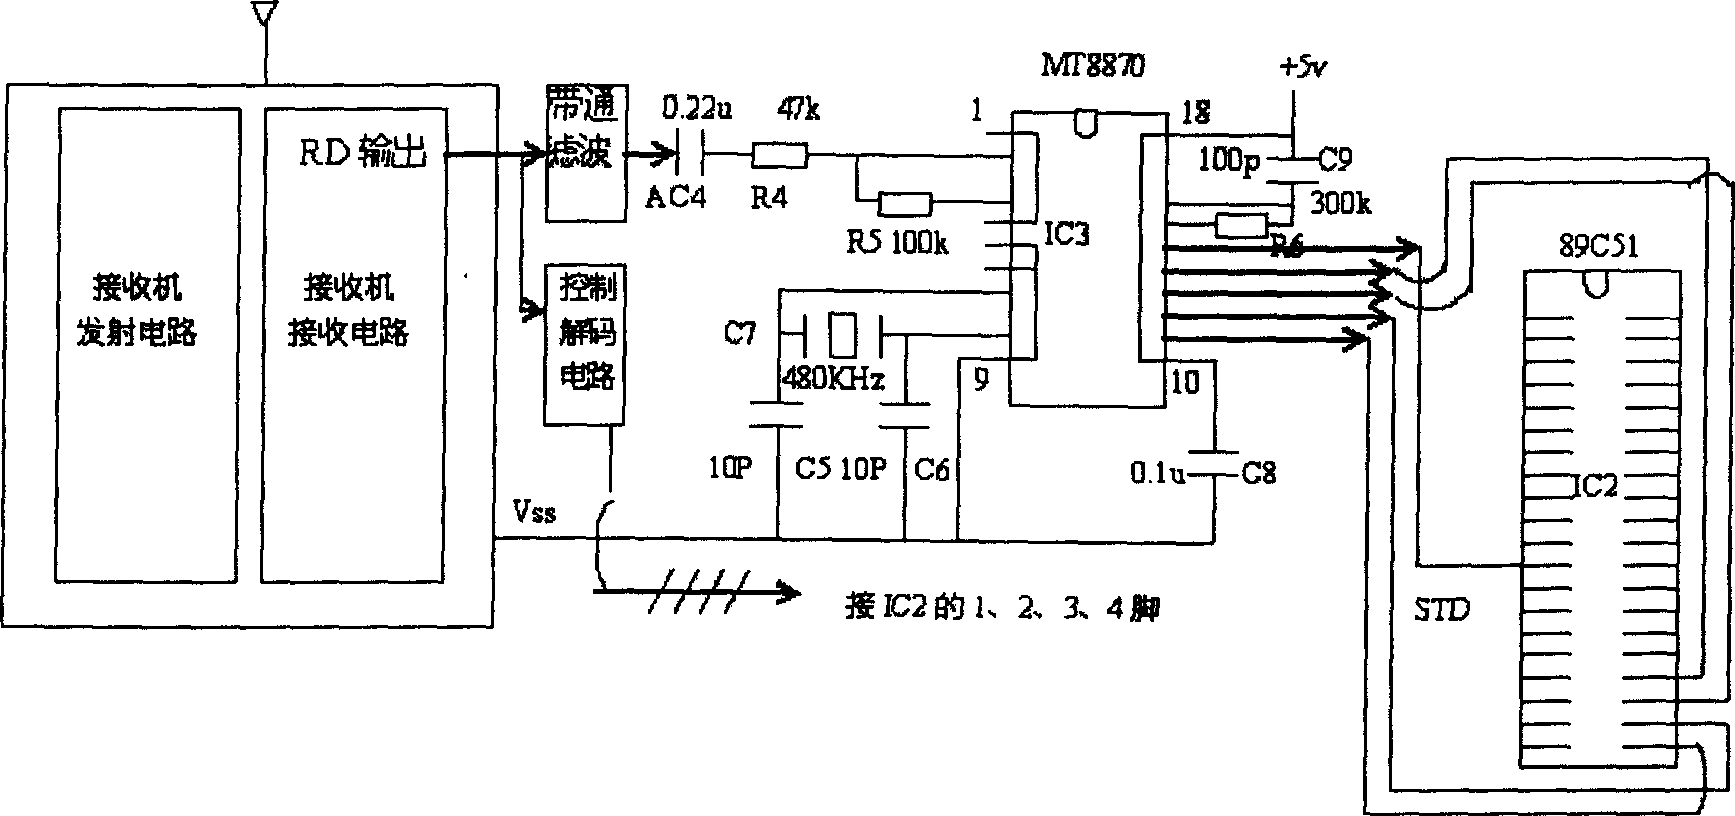 Intercom remote control device with identity code function